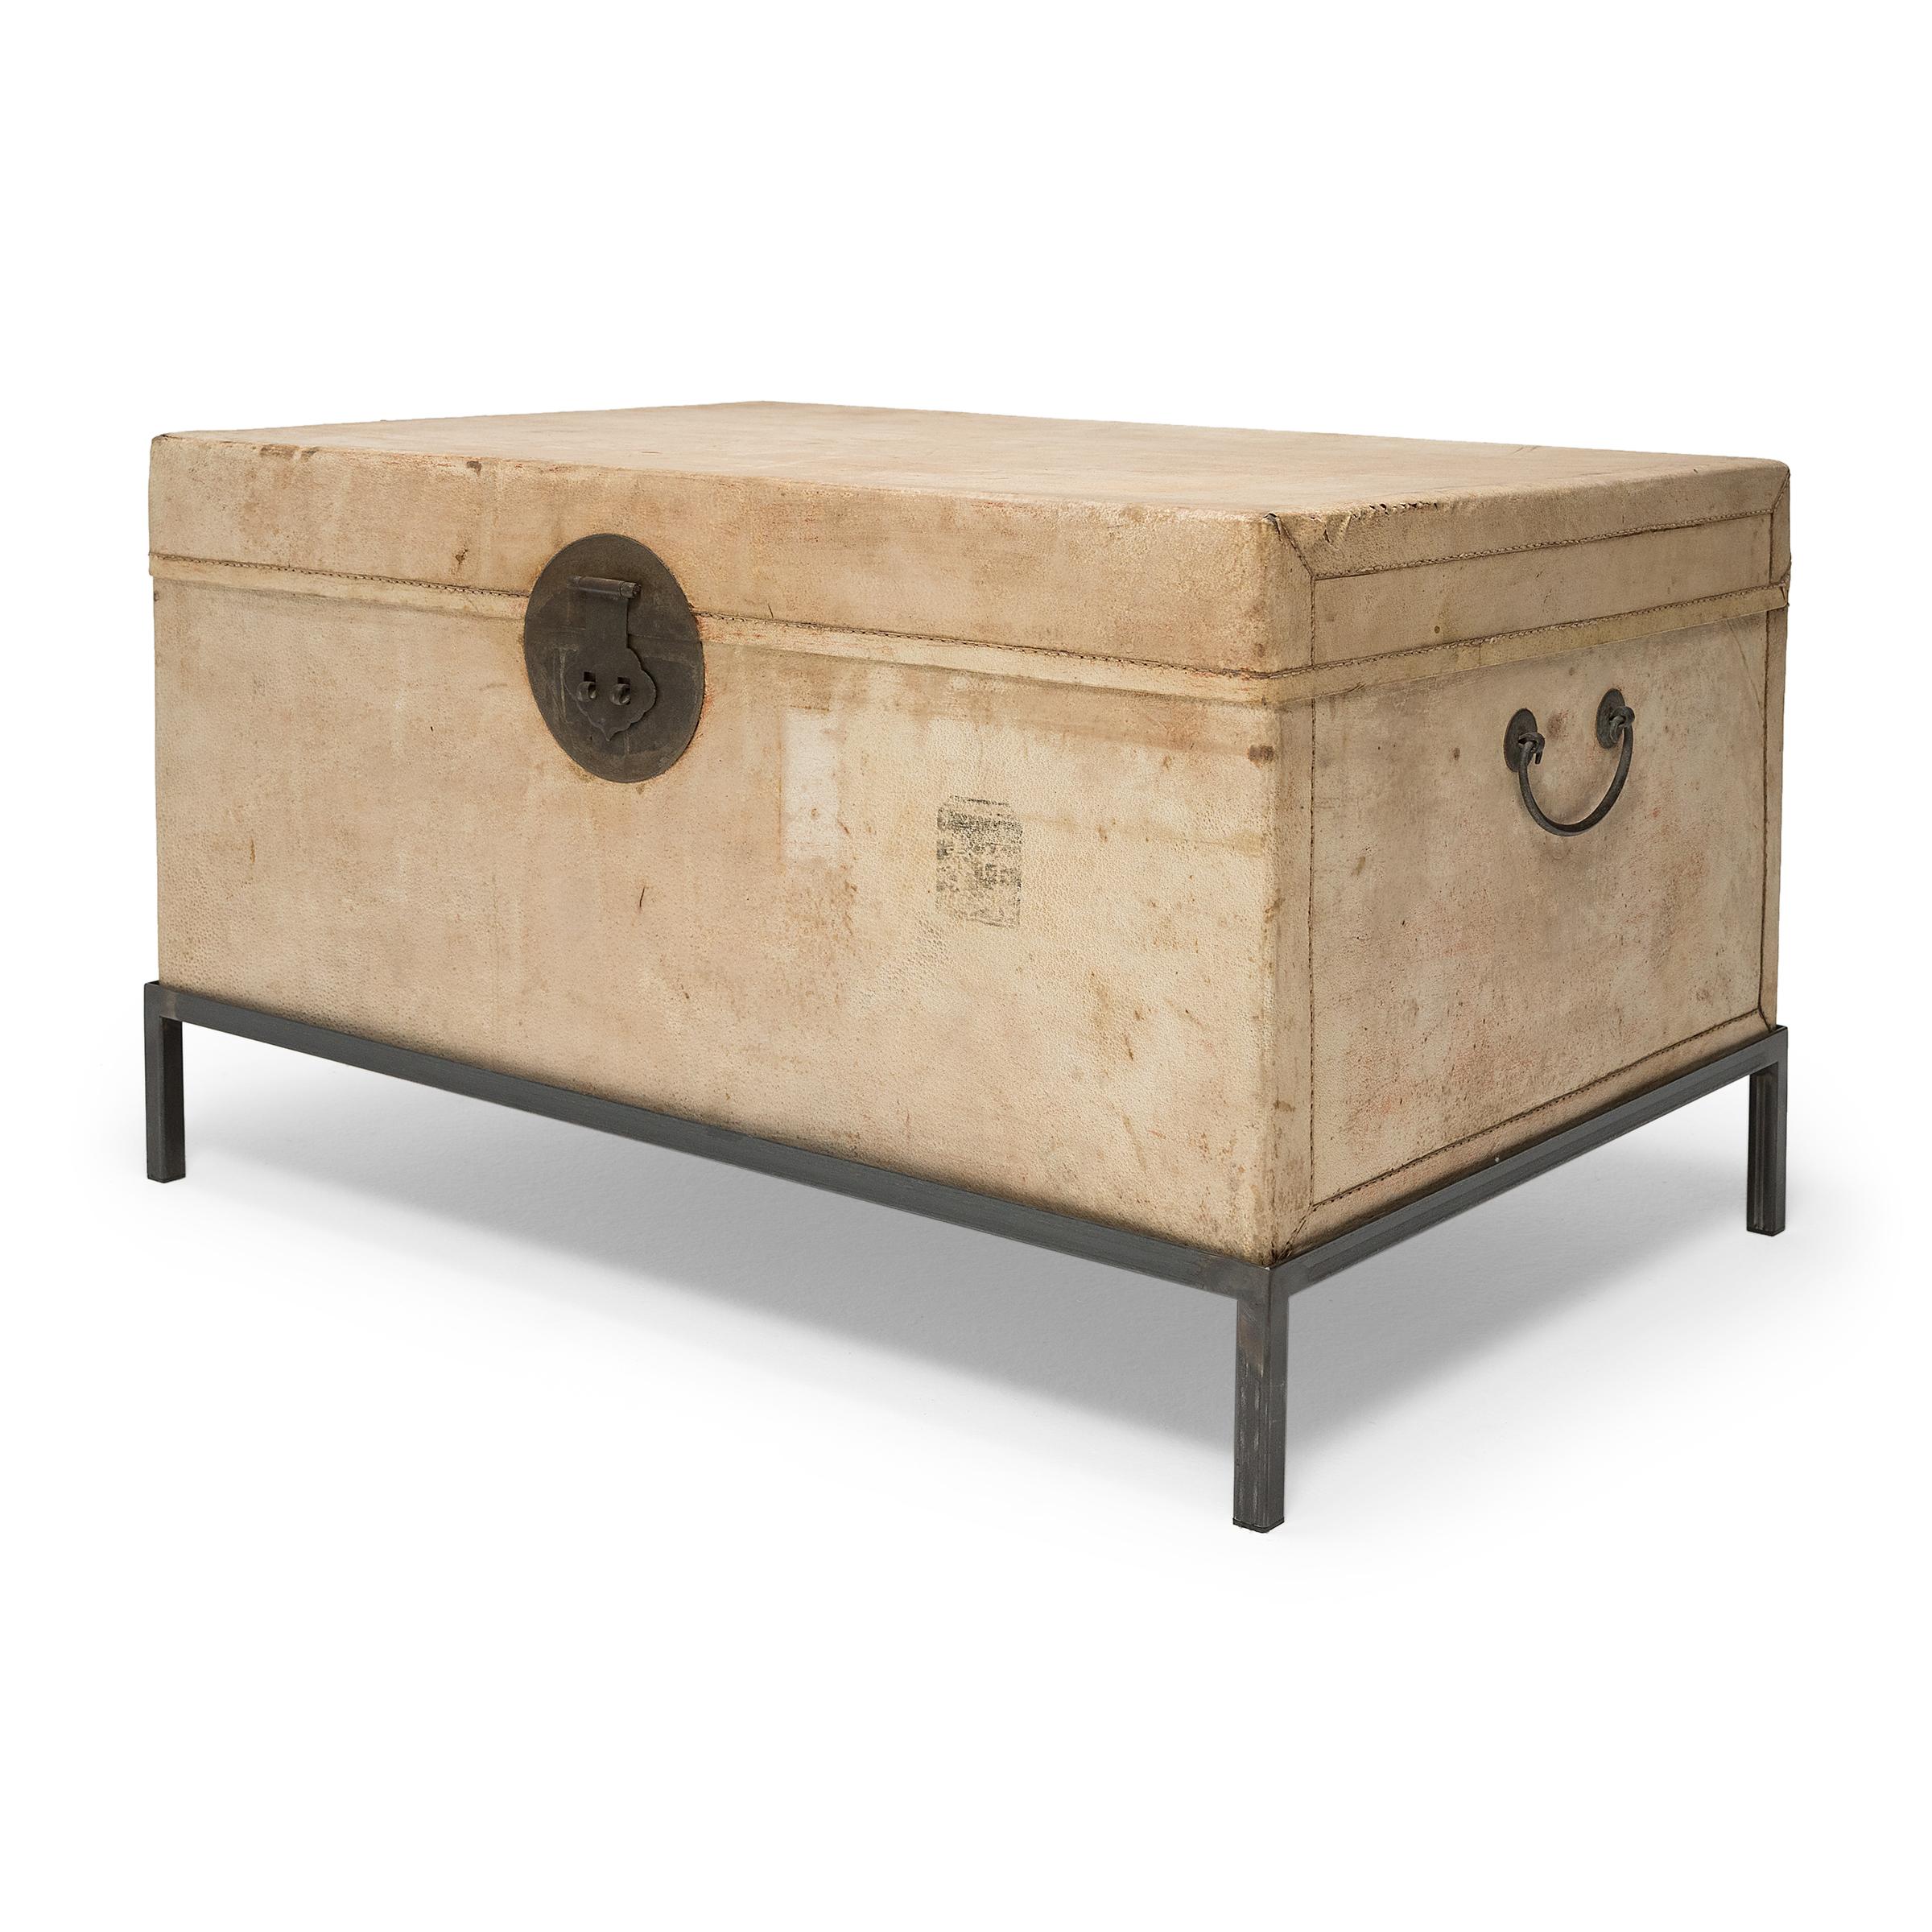 Steel Blonde Chinese Hide Trunk Table, circa 1800 For Sale